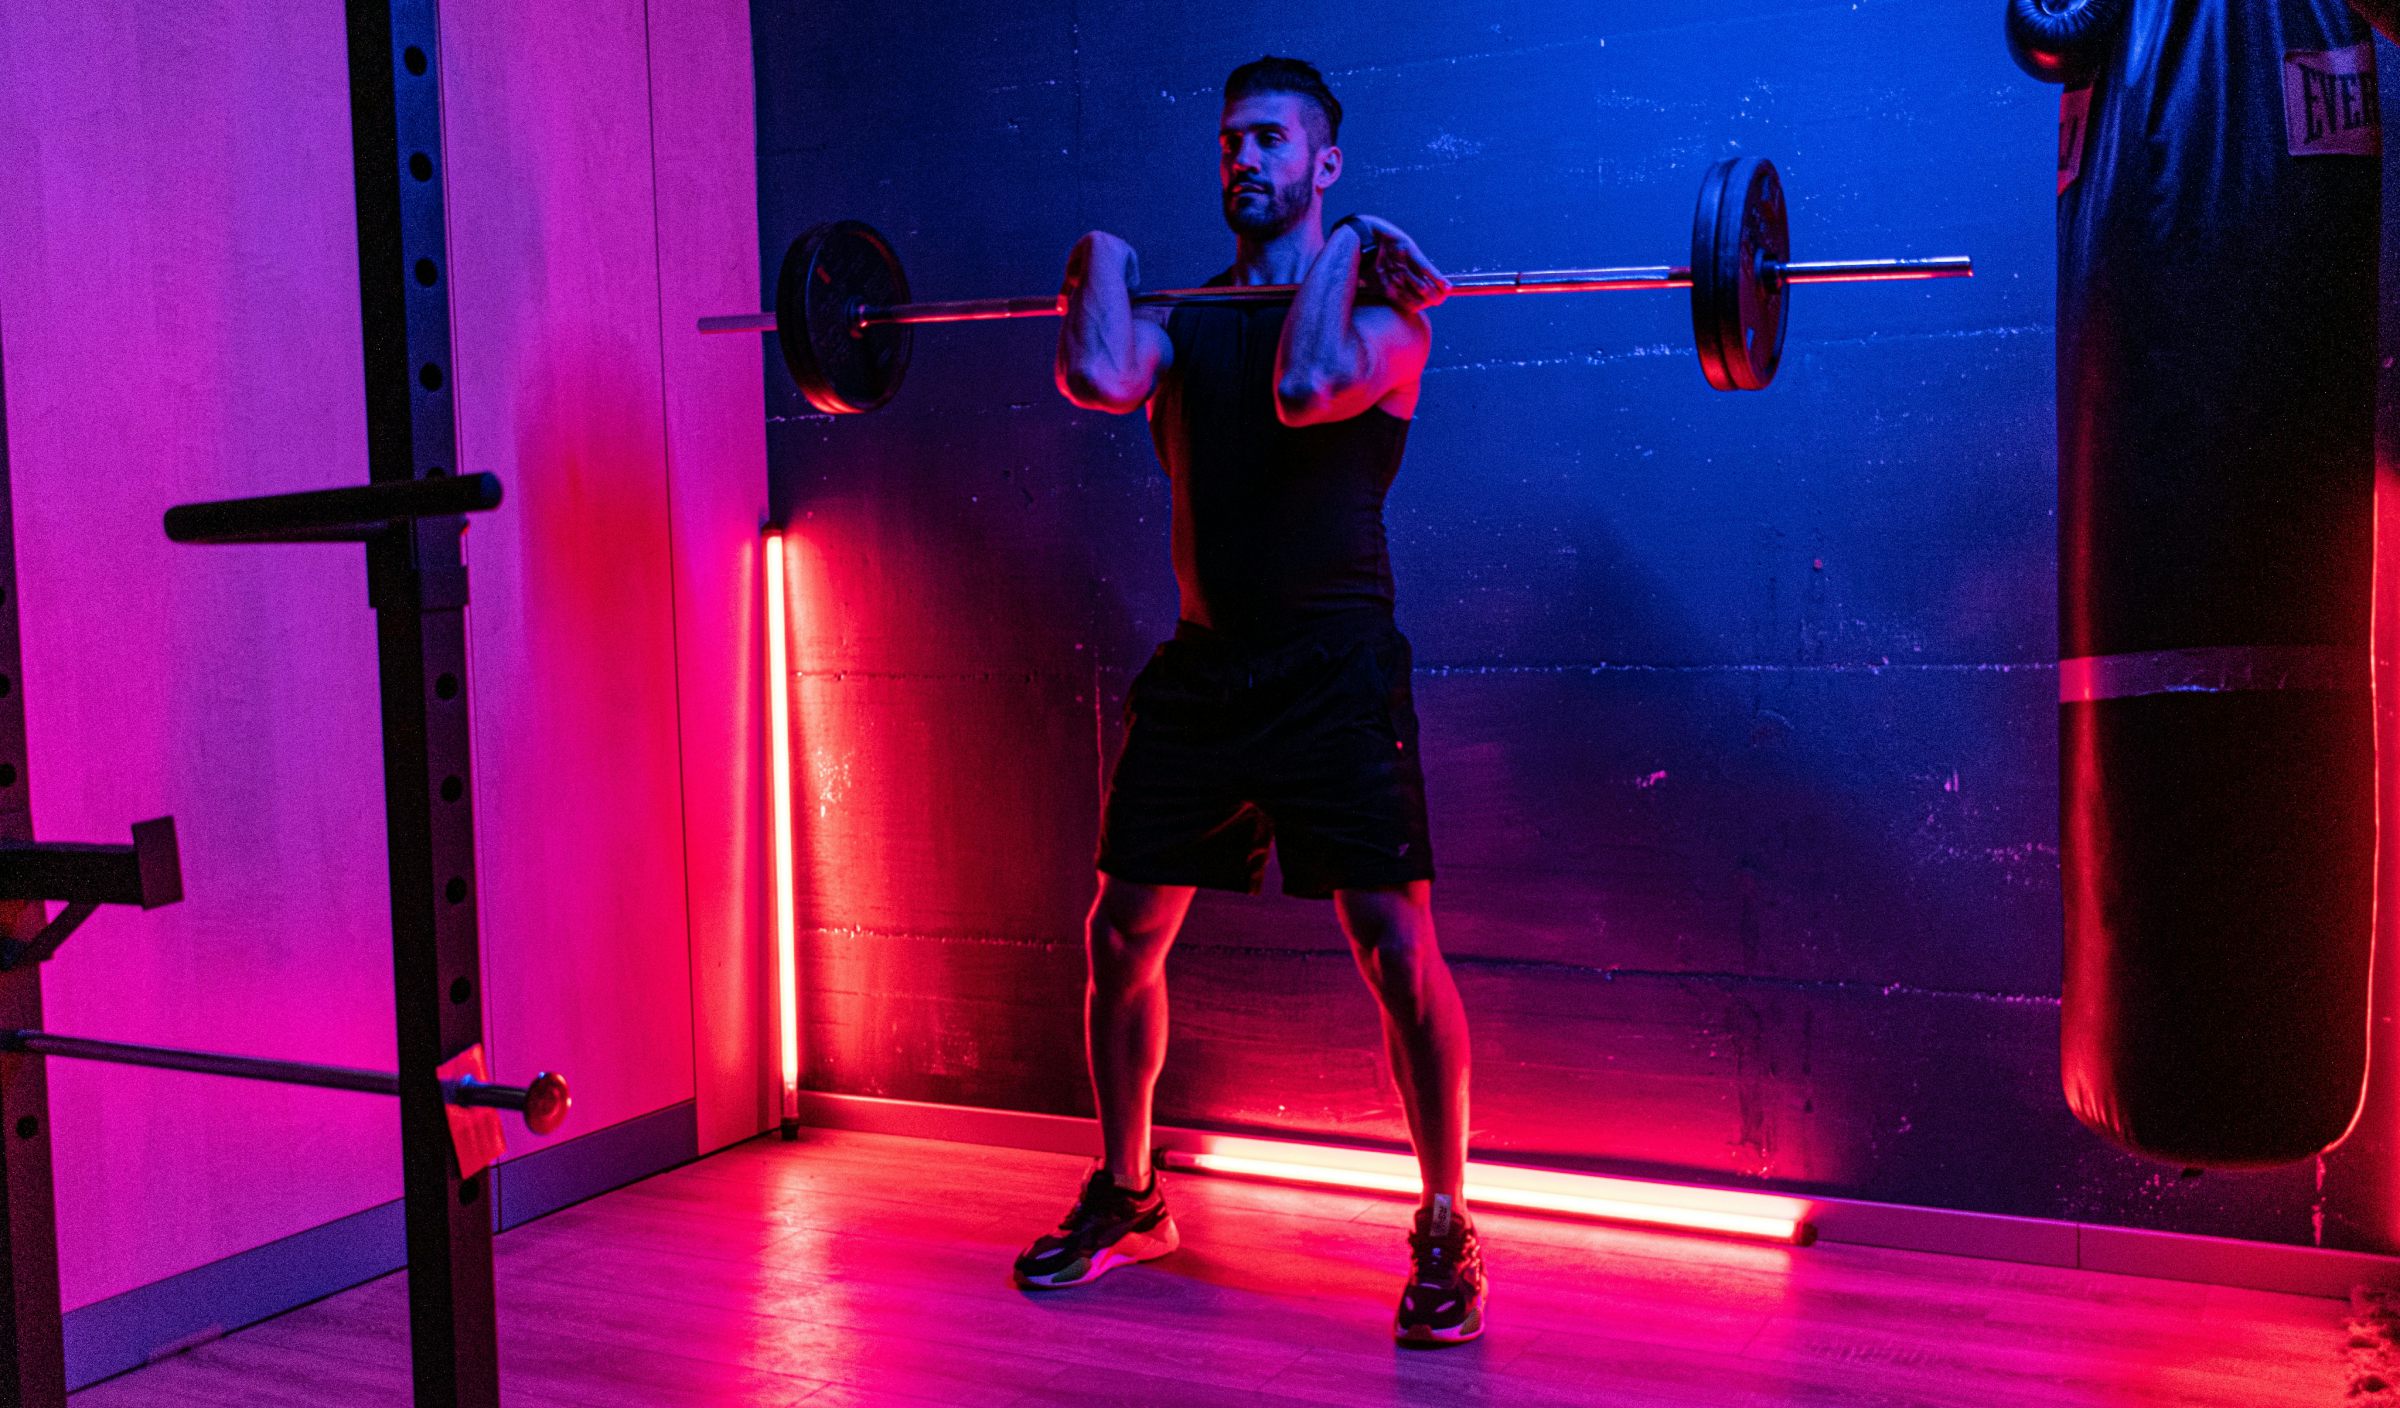 A man holding a barbell in a gym with red and blue lights.